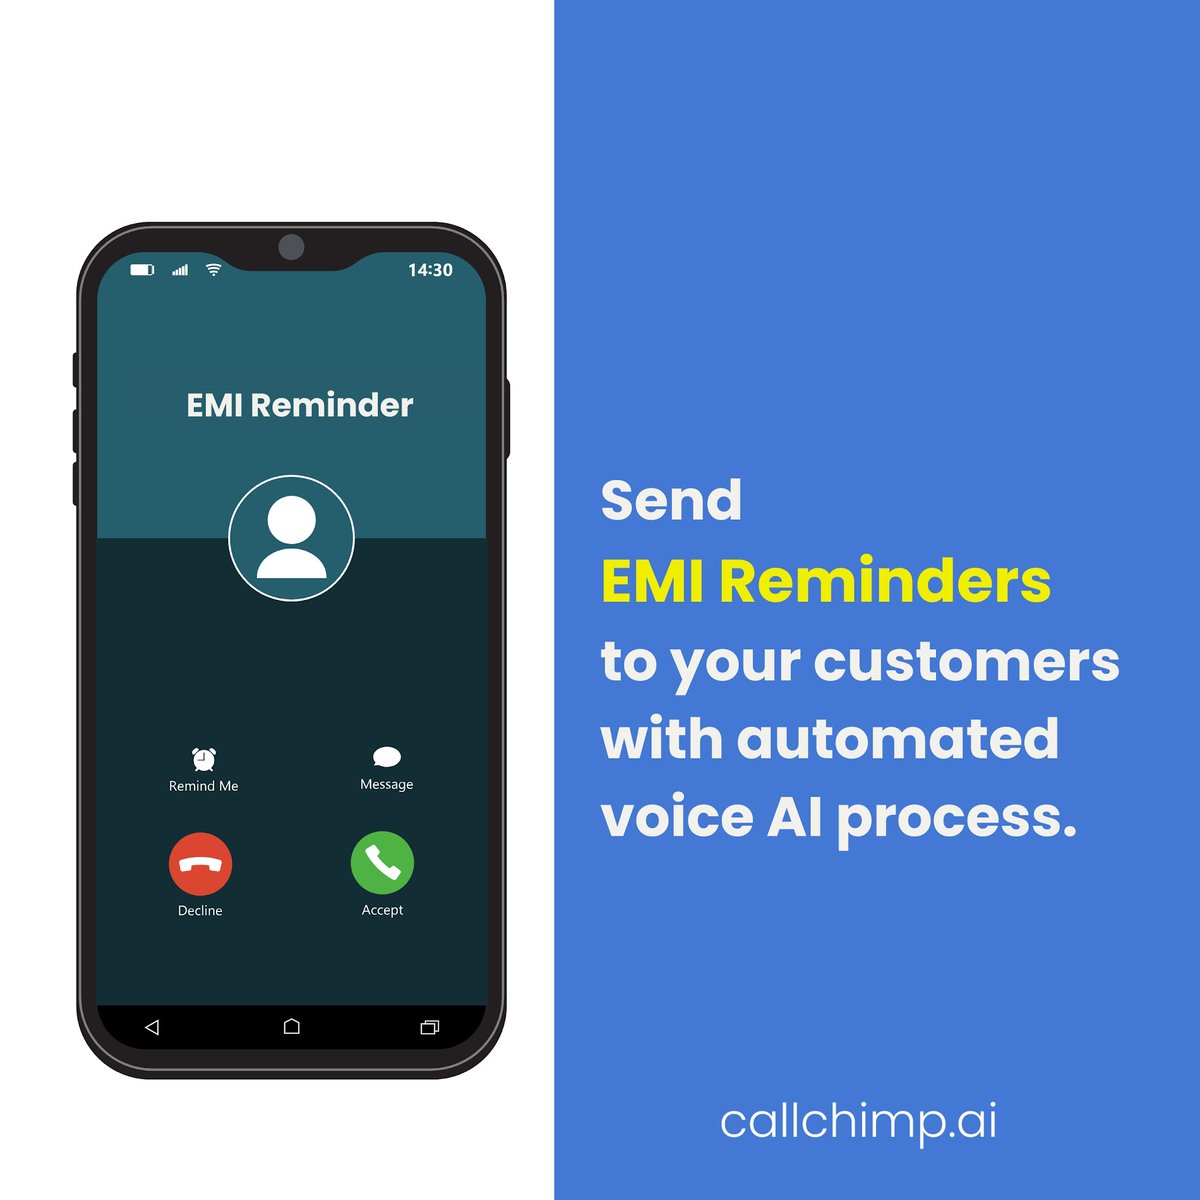 Make your calling easier and simpler with Callchimp. For demo book us a call my commenting 'DEMO'. #aivoice #voicetechnology #innovation #technology #b2bmarketing #businesstools #businessautomation #businessai